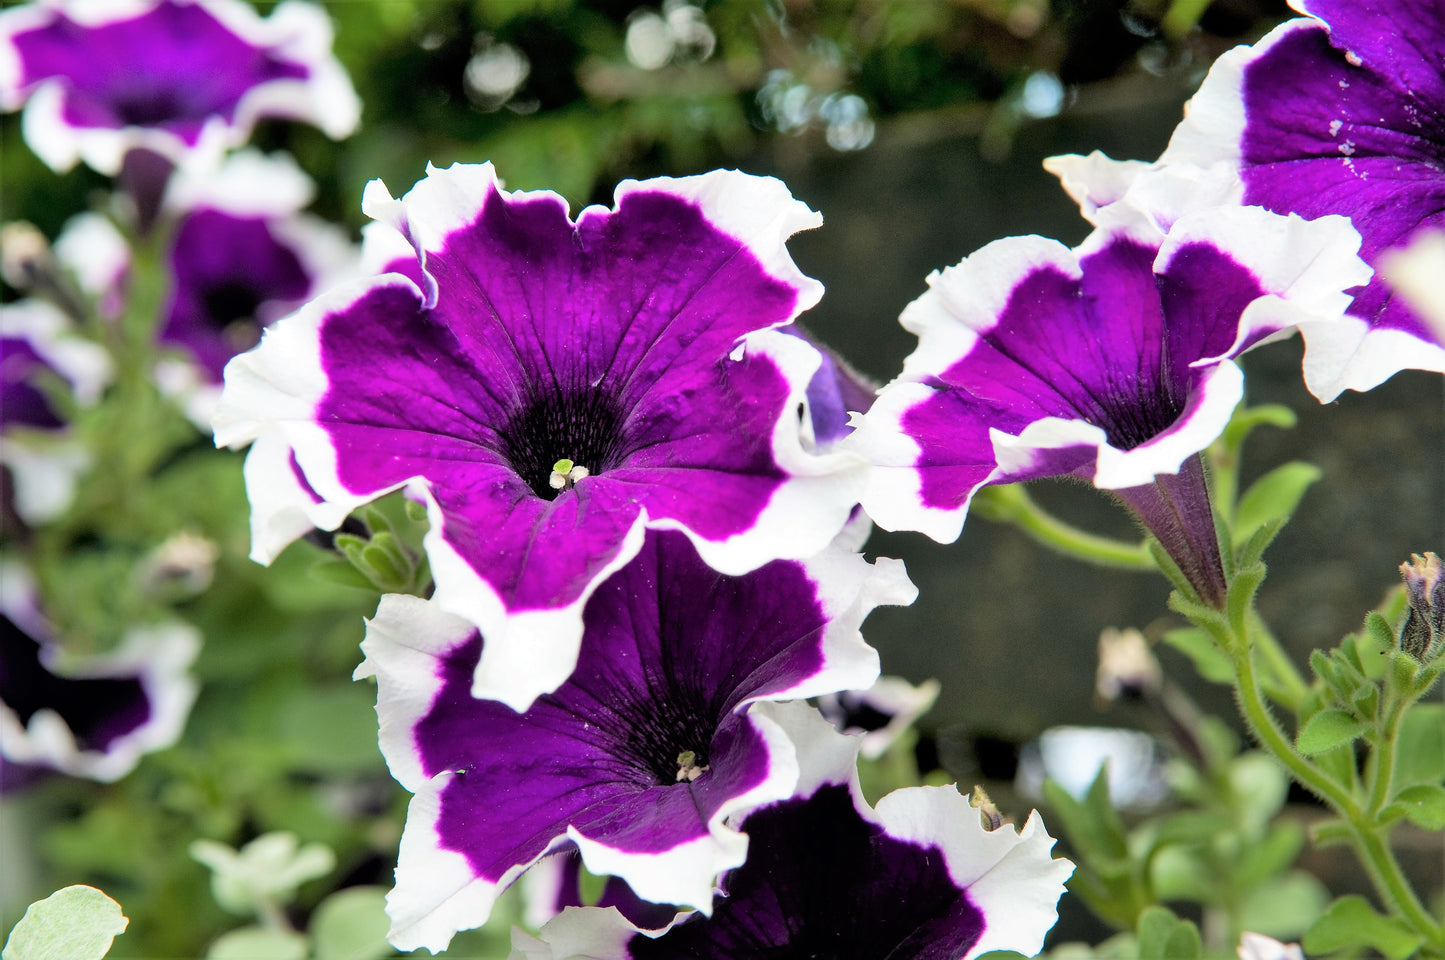 50 PICOTEE MIX PETUNIA Multiflora Mixed Colors Bicolor White Blue Purple Pink Red Flower Seeds